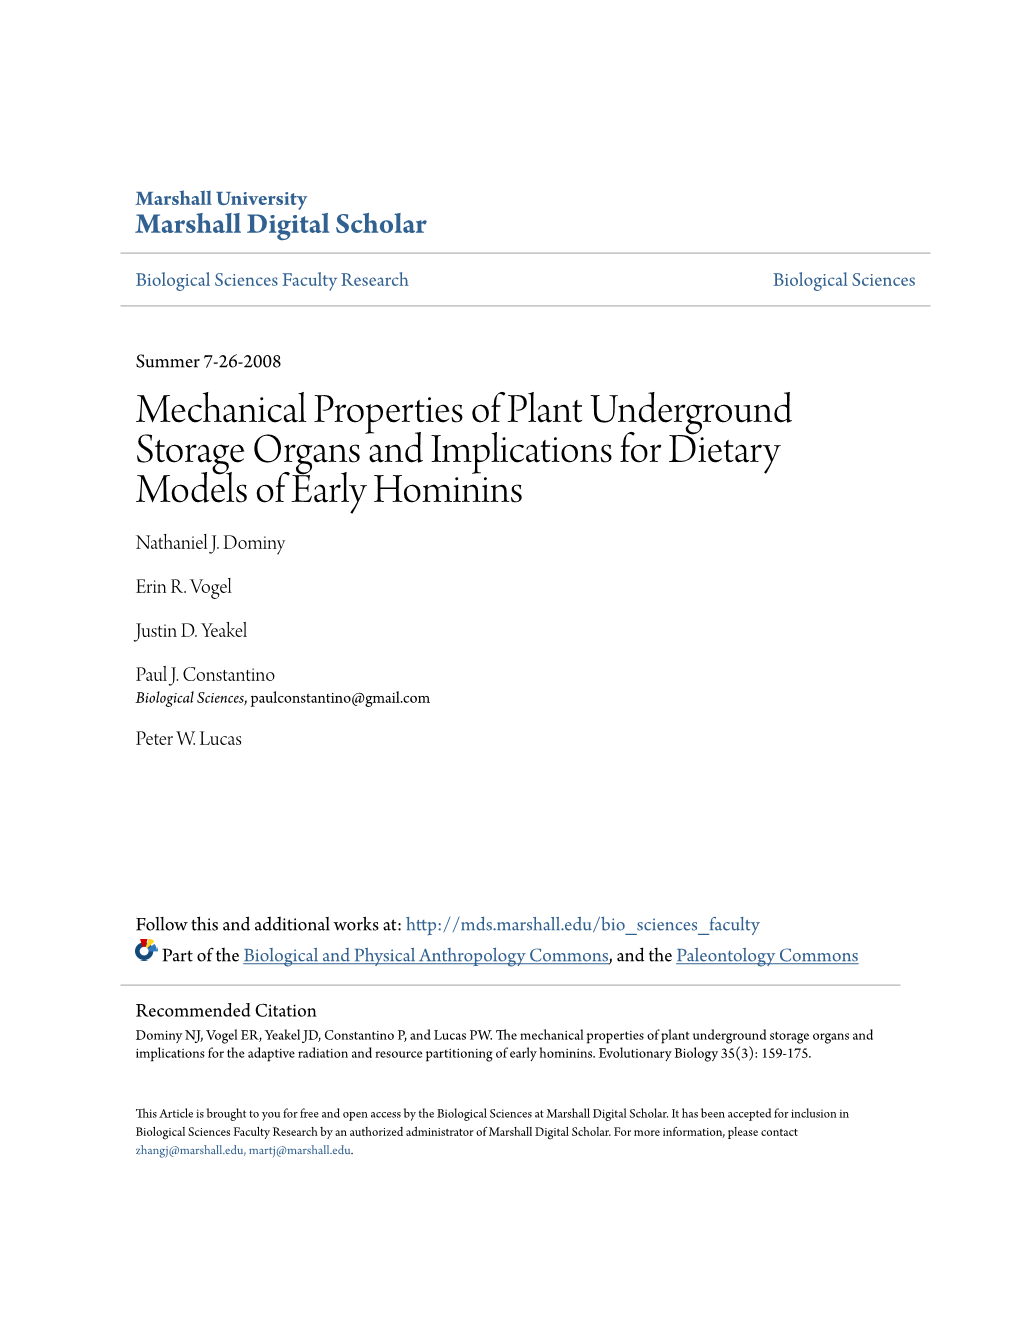 Mechanical Properties of Plant Underground Storage Organs and Implications for Dietary Models of Early Hominins Nathaniel J